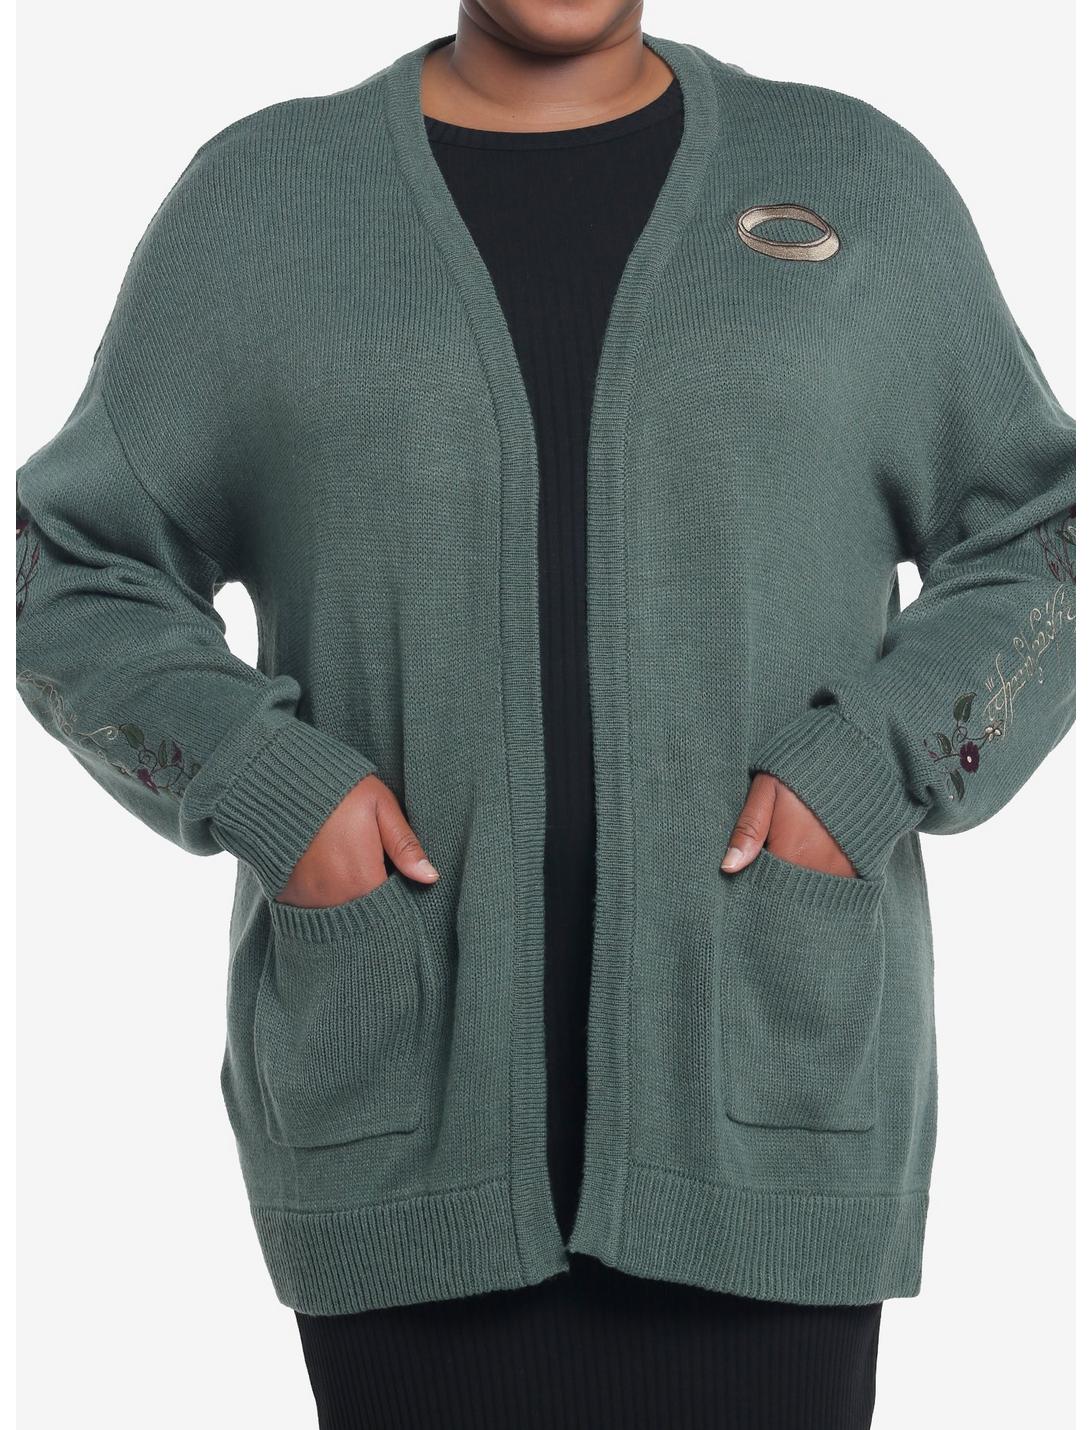 The Lord Of The Rings One Ring Cardigan Plus Size, DARK GREEN, hi-res